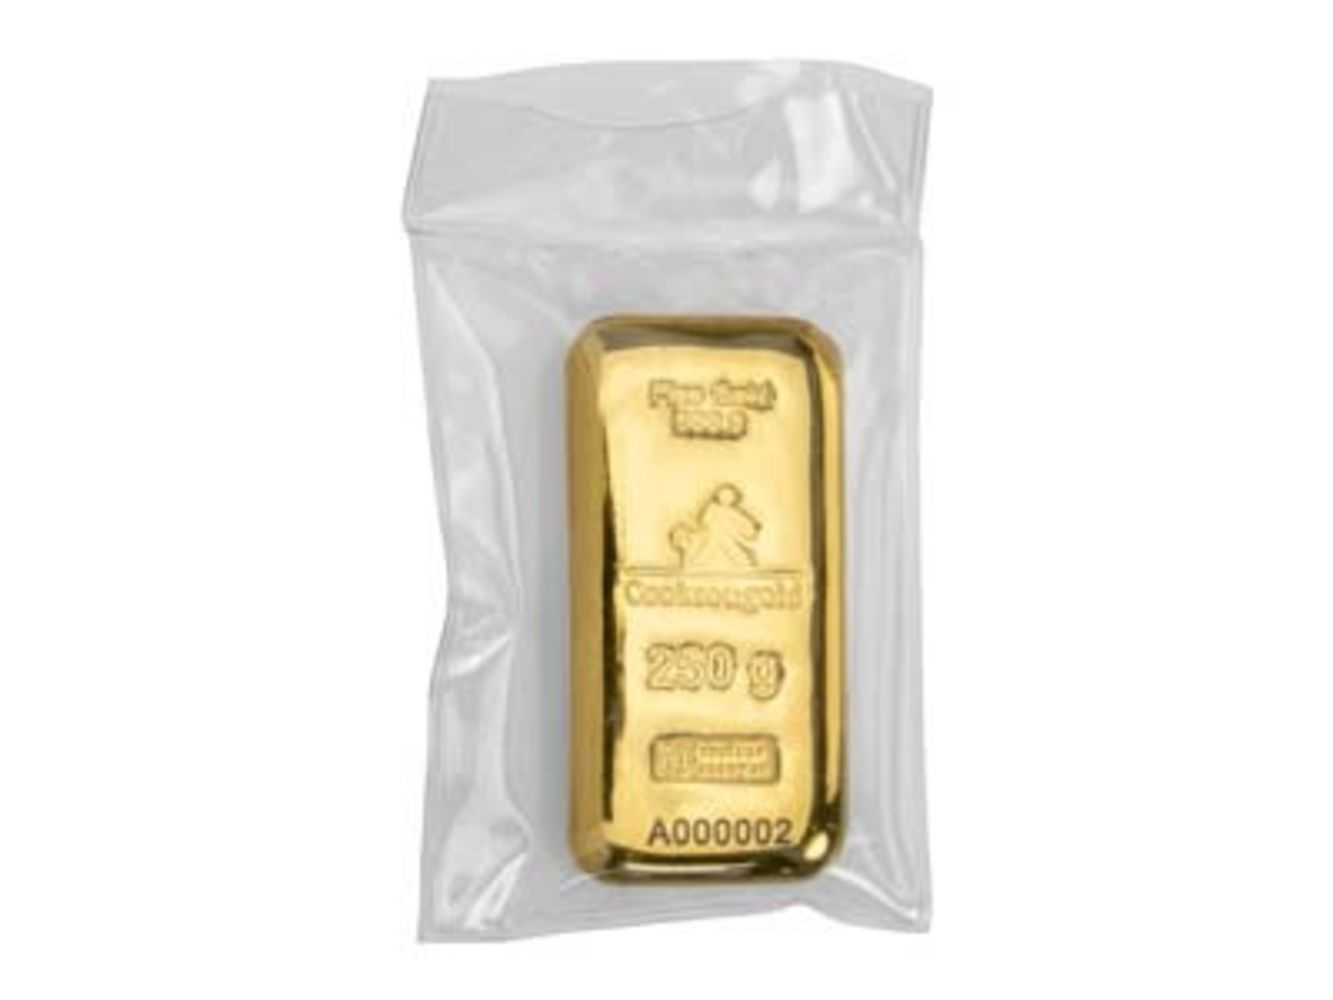 NO VAT Gold Bullion Bars In 1oz, 100g & 250g - Ideal Investment or Gifts For Christmas